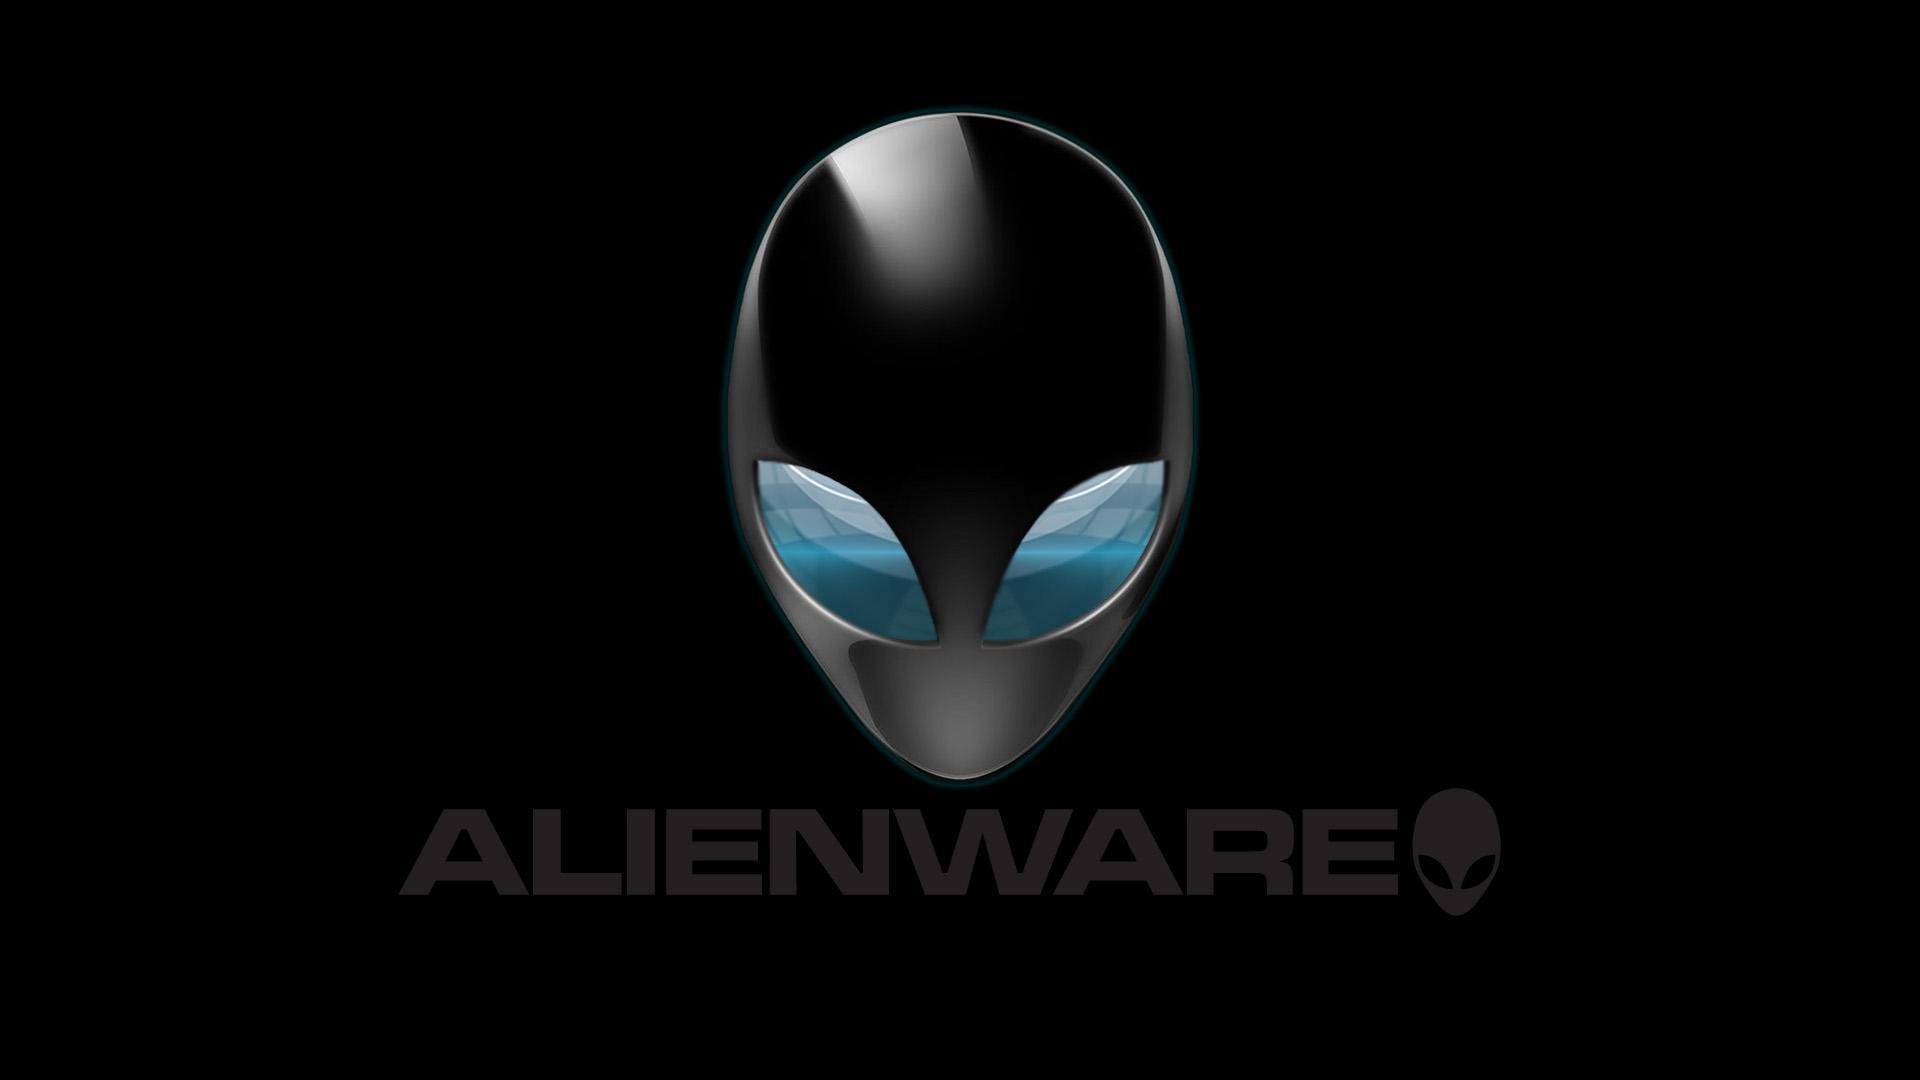 Alienware High Quality And Resolution Wallpaper On